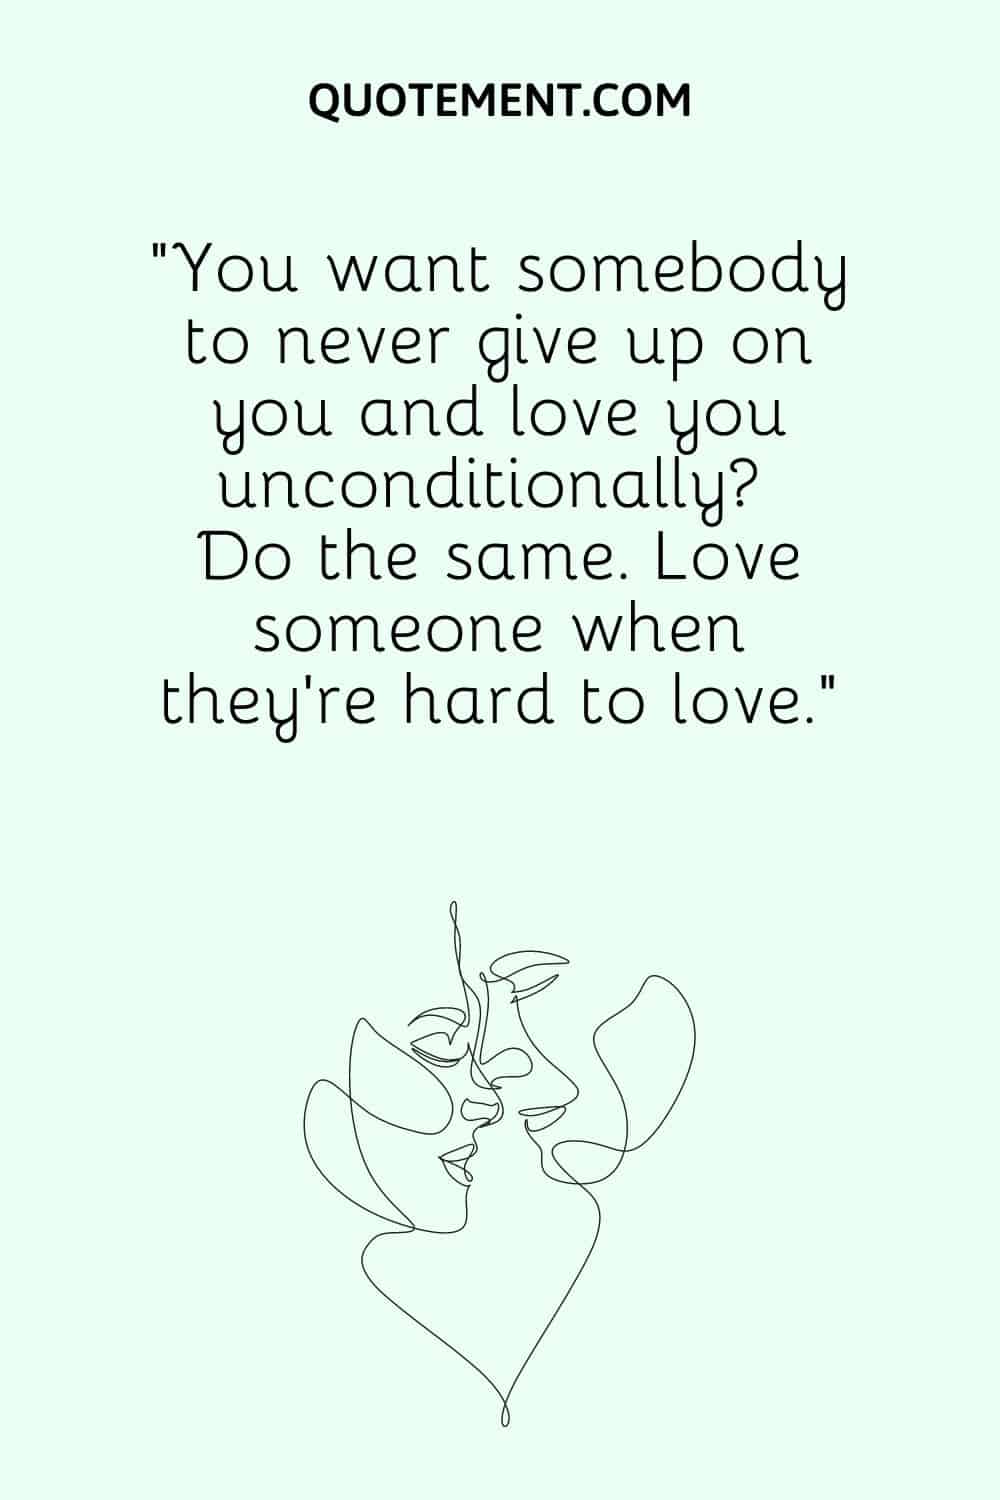 “You want somebody to never give up on you and love you unconditionally Do the same. Love someone when they’re hard to love.”